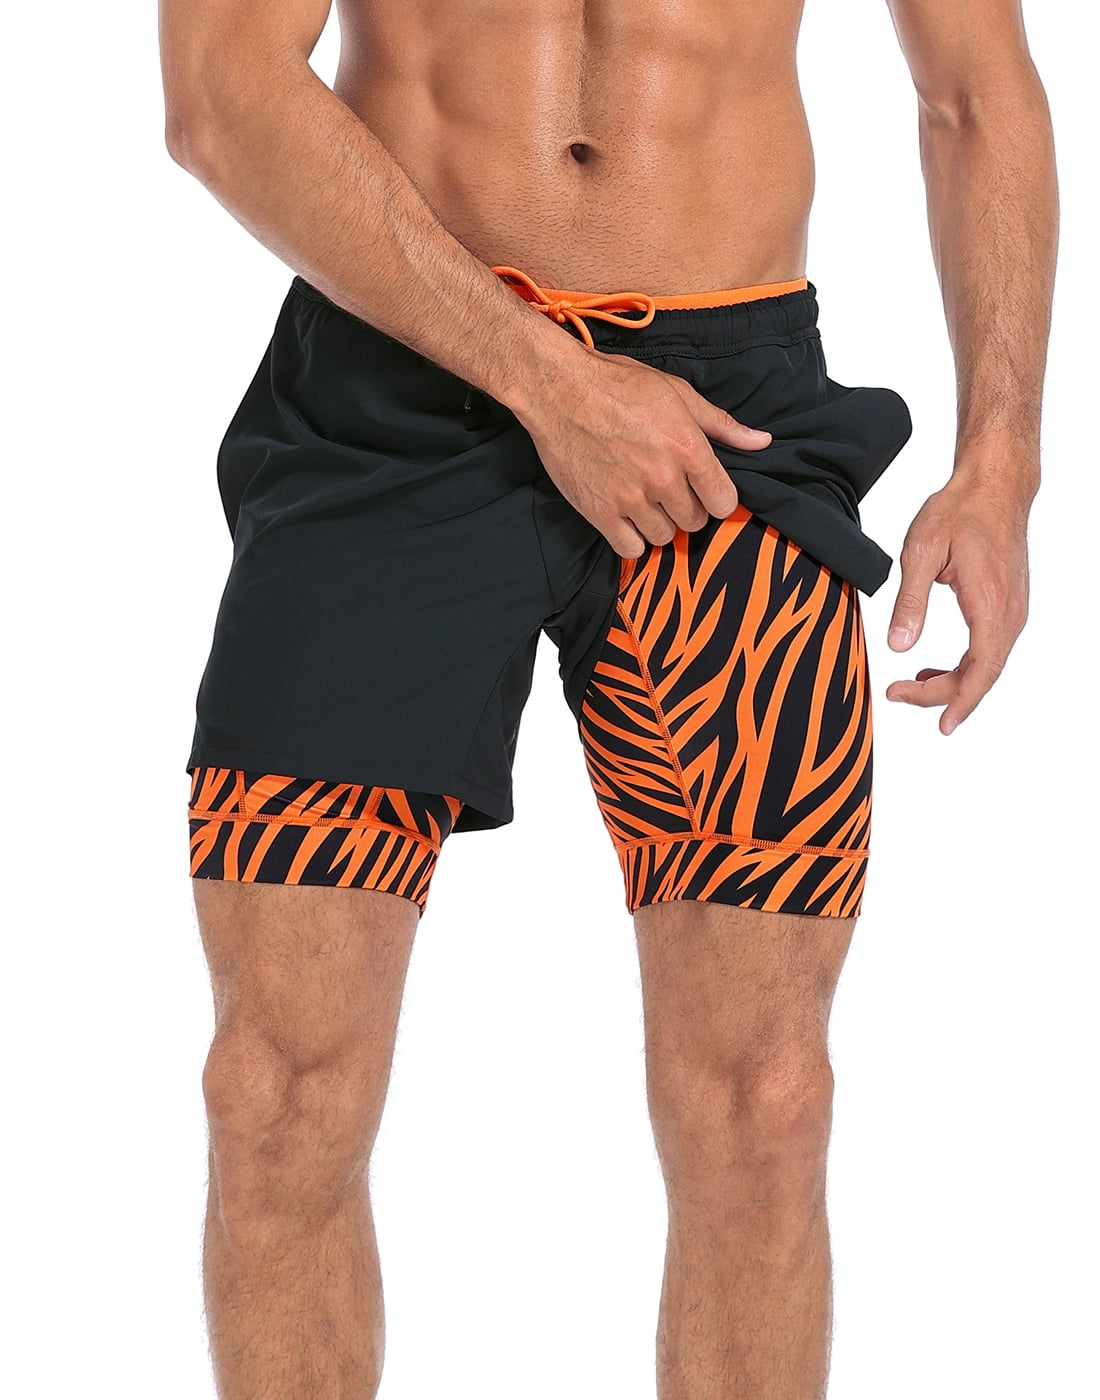 Mens Compression Lined Shorts